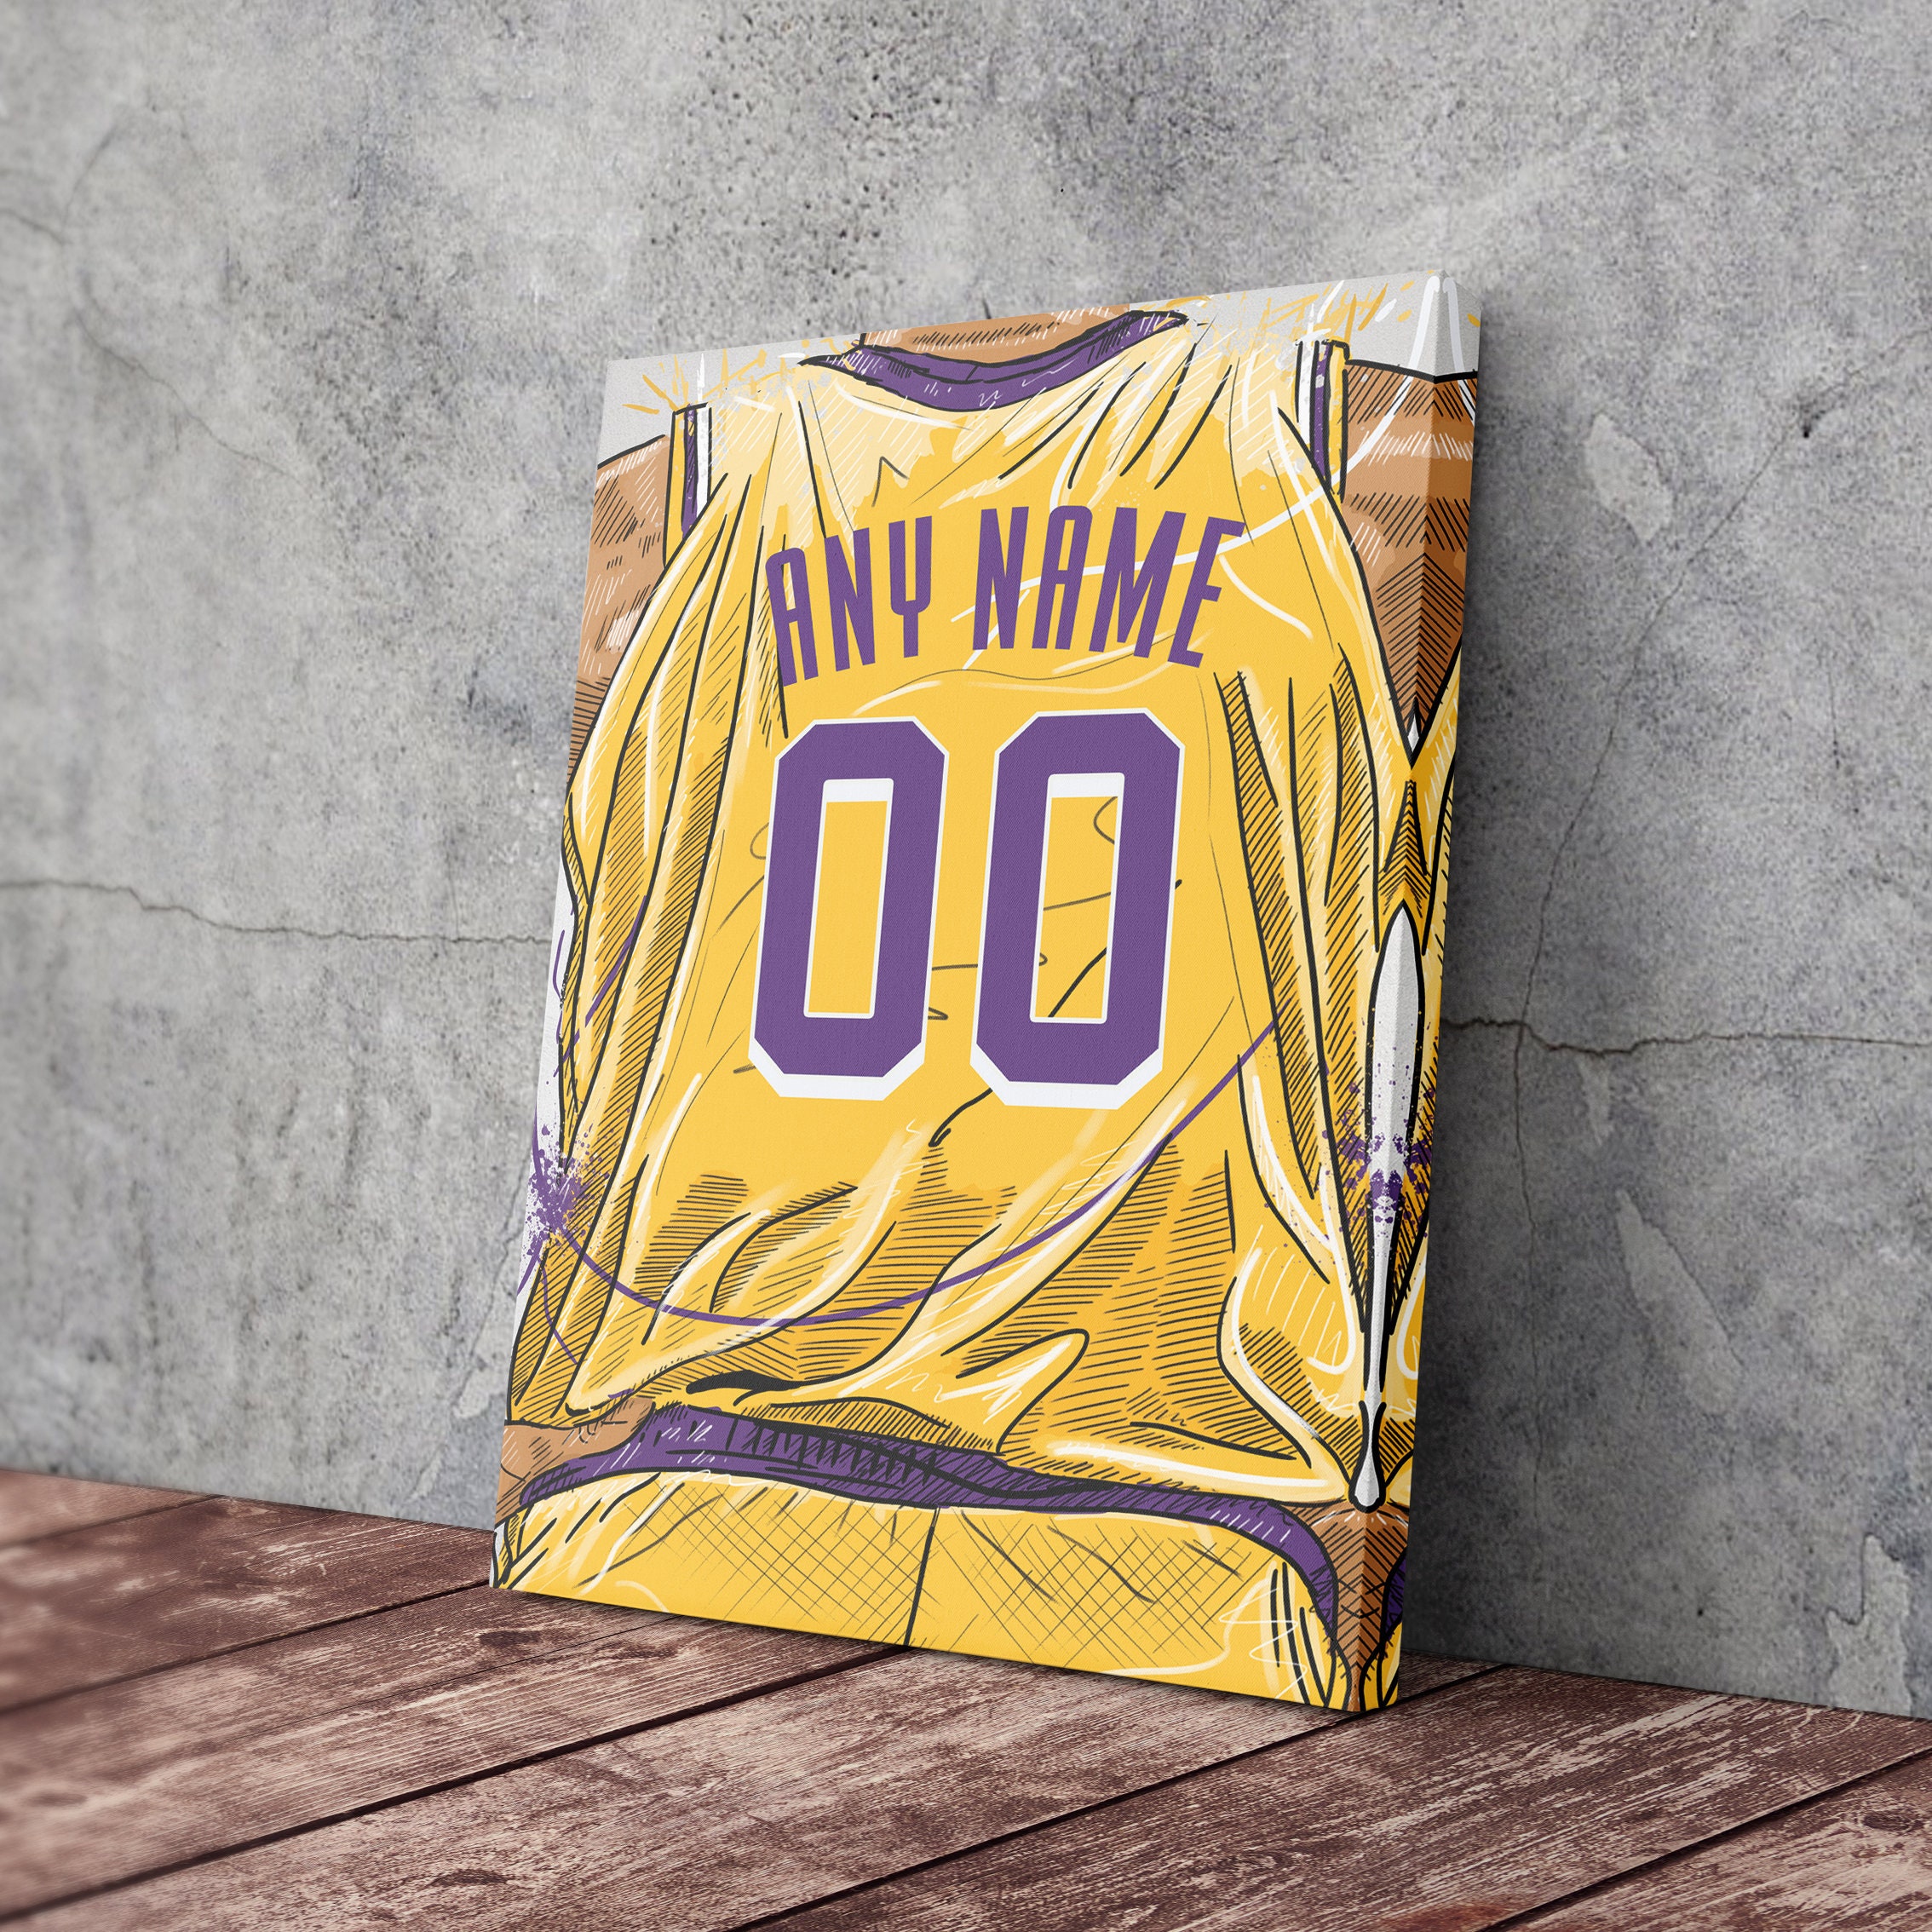 16 Lakers Jersey Images, Stock Photos, 3D objects, & Vectors